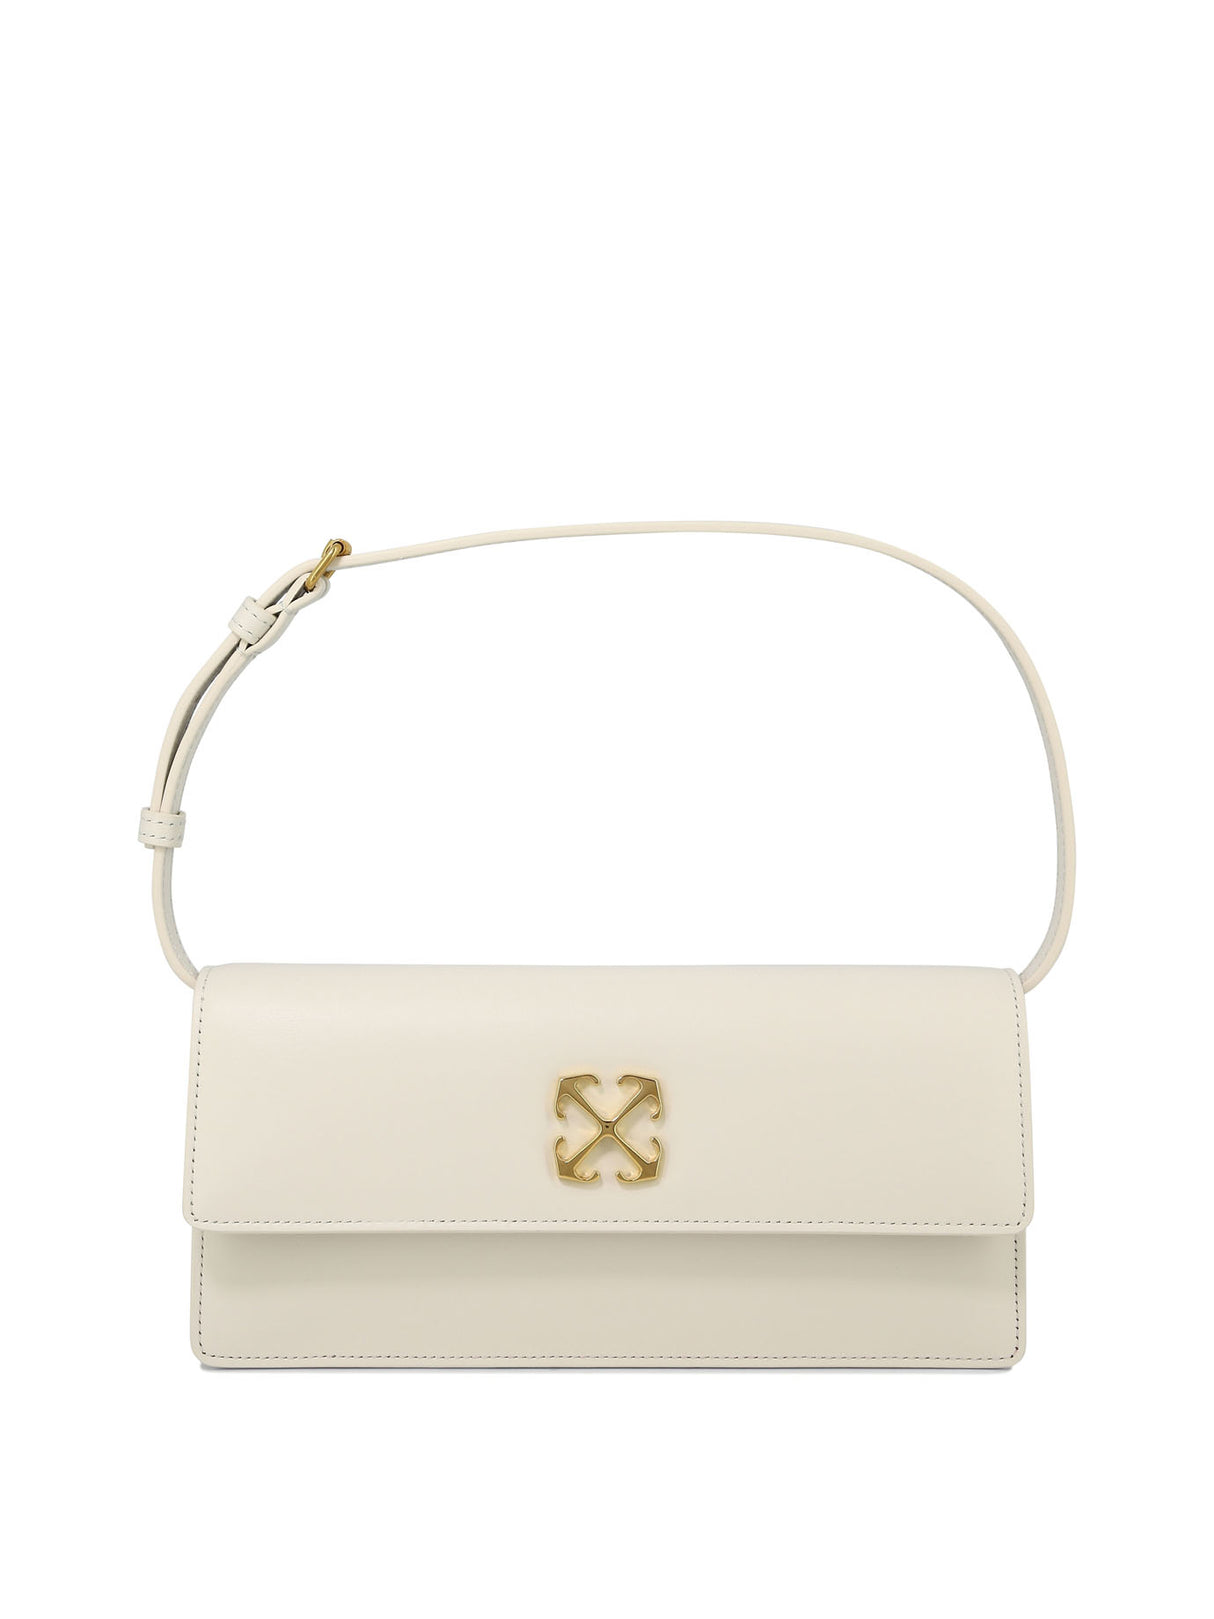 OFF-WHITE White Leather Shoulder Handbag for Women - SS24 Collection